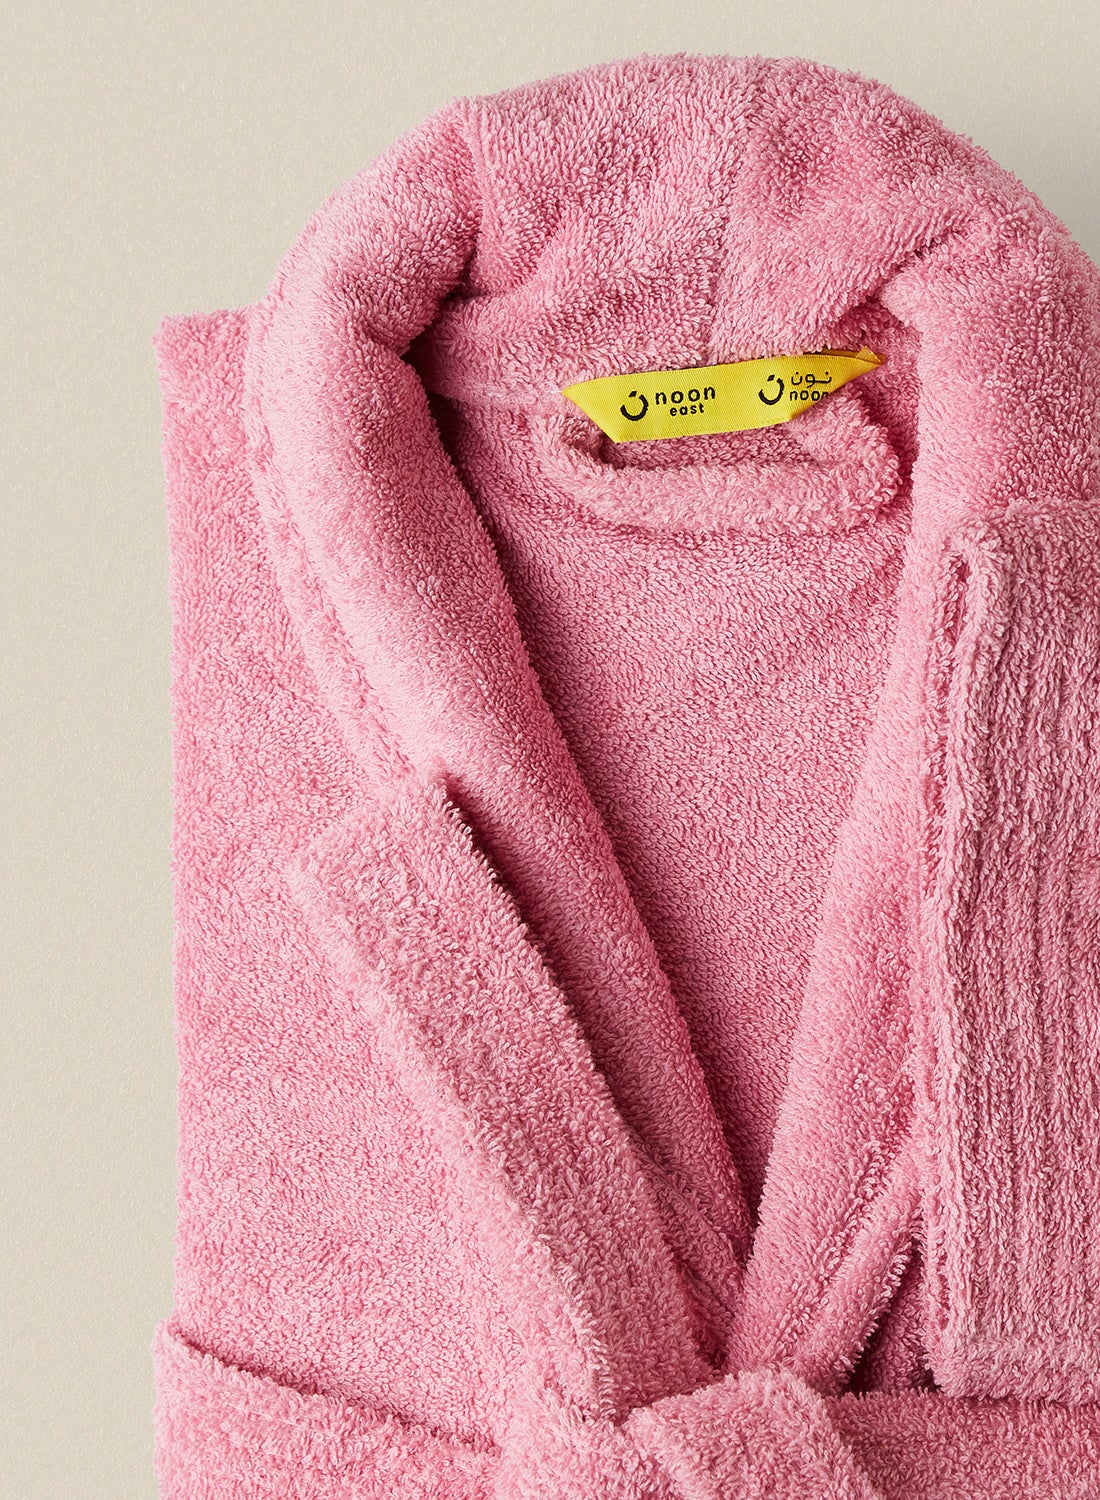 Bathrobe - 400 GSM 100% Cotton Terry Silky Soft Spa Quality Comfort - Shawl Collar & Pocket - Pink Color - 1 Piece 